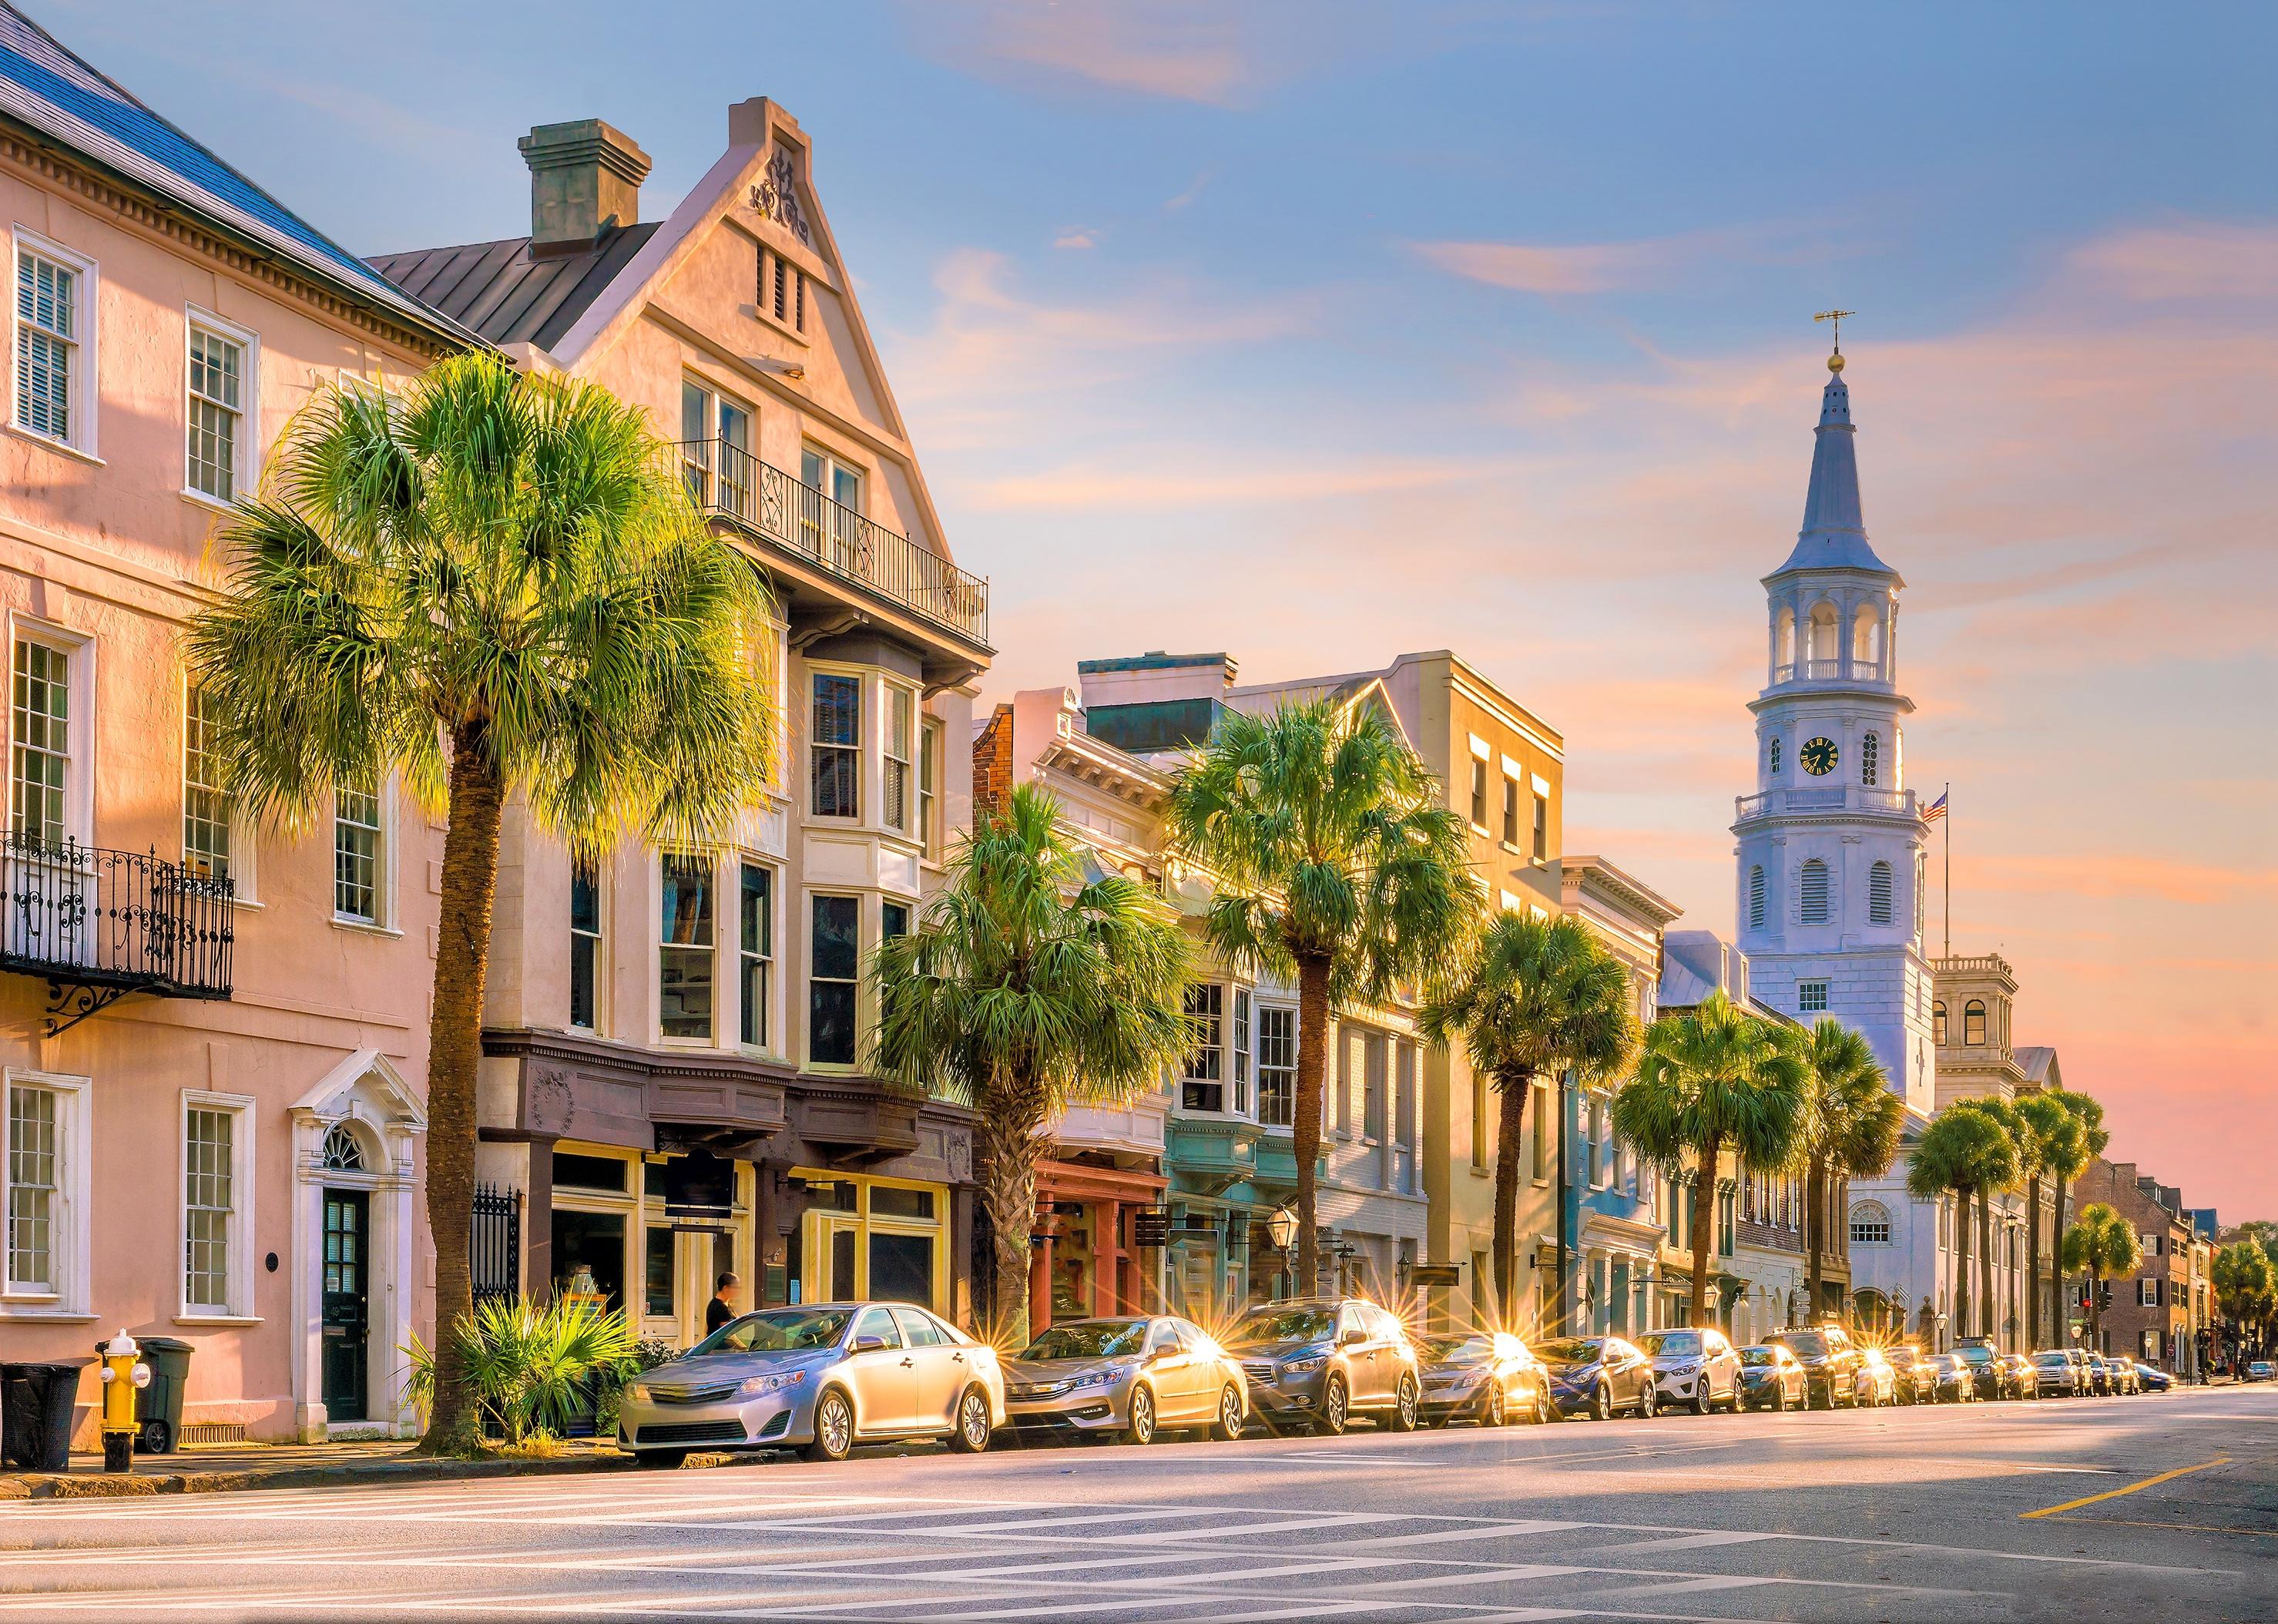 Historical downtown area of Charleston.